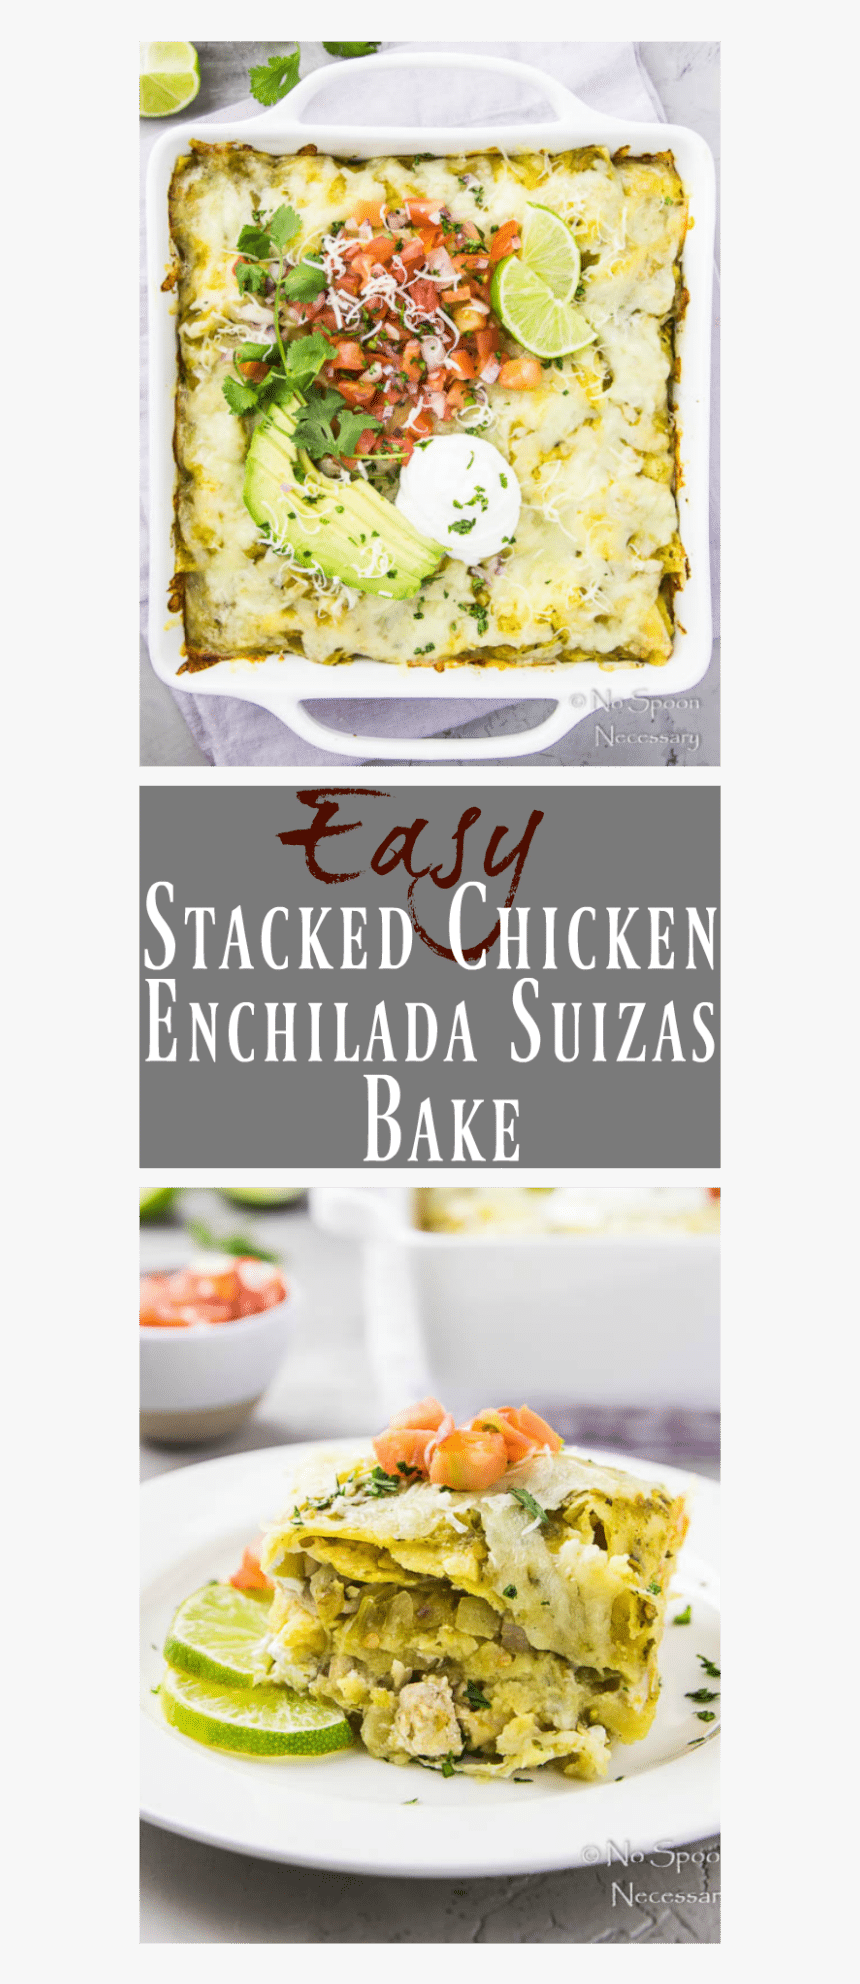 Easy Stacked Enchilada Suizas Bake - Mashed Potato, HD Png Download, Free Download